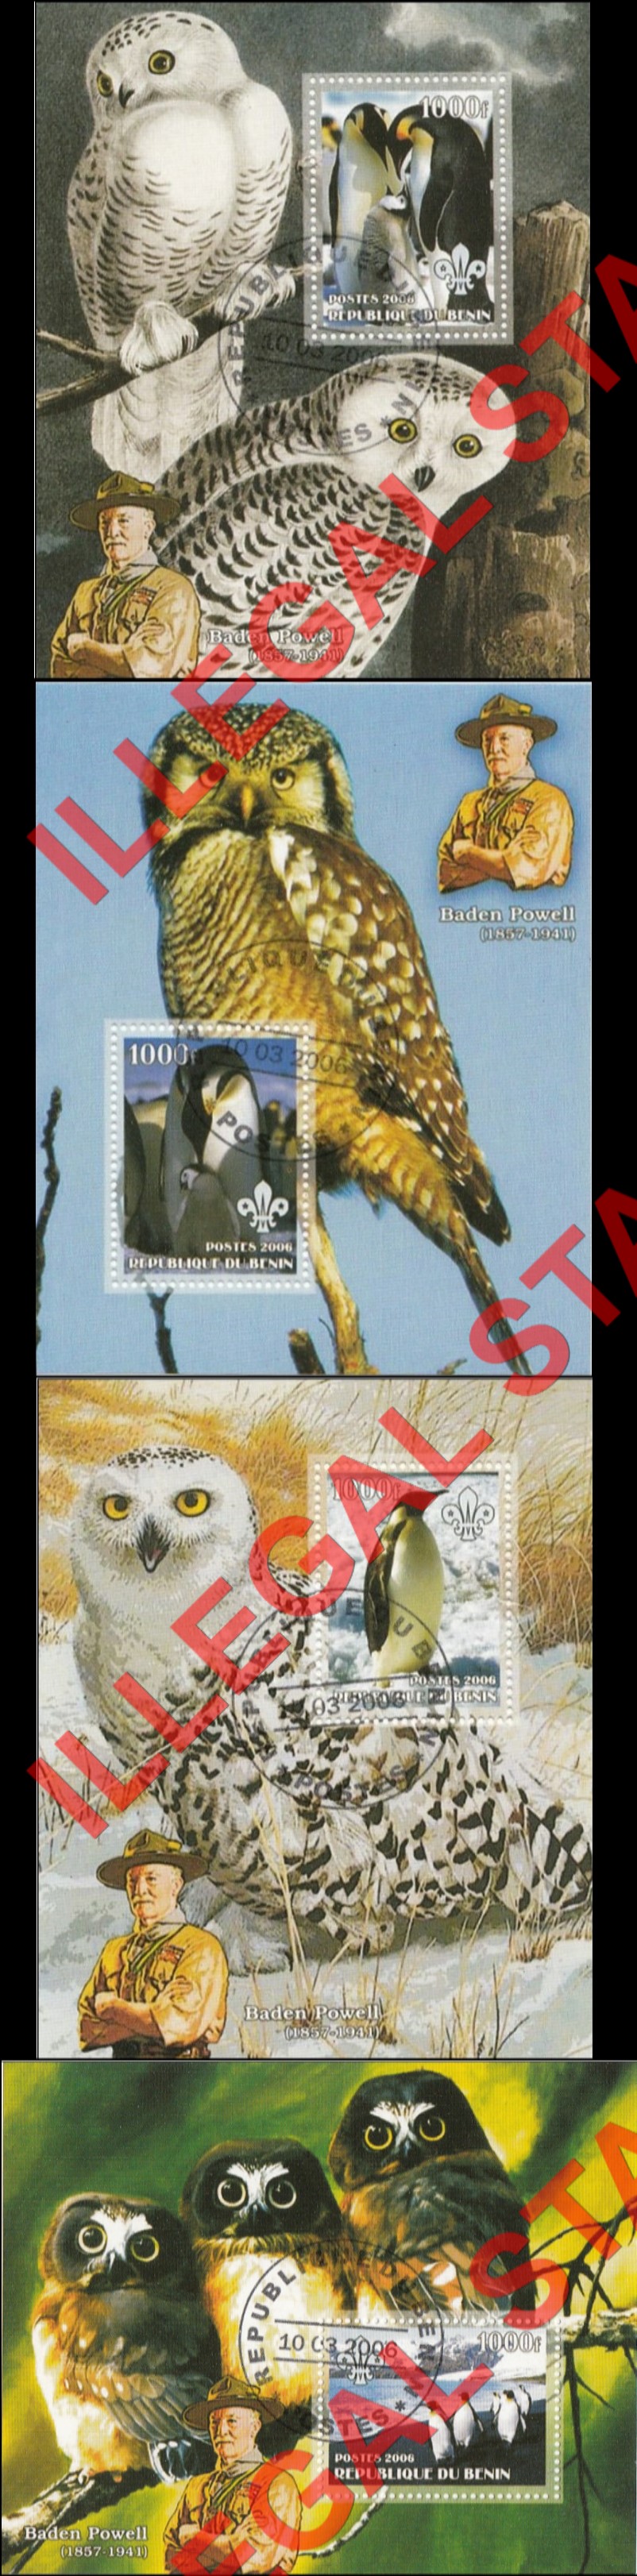 Benin 2006 Owls and Penguins Illegal Stamp Souvenir Sheets of 1